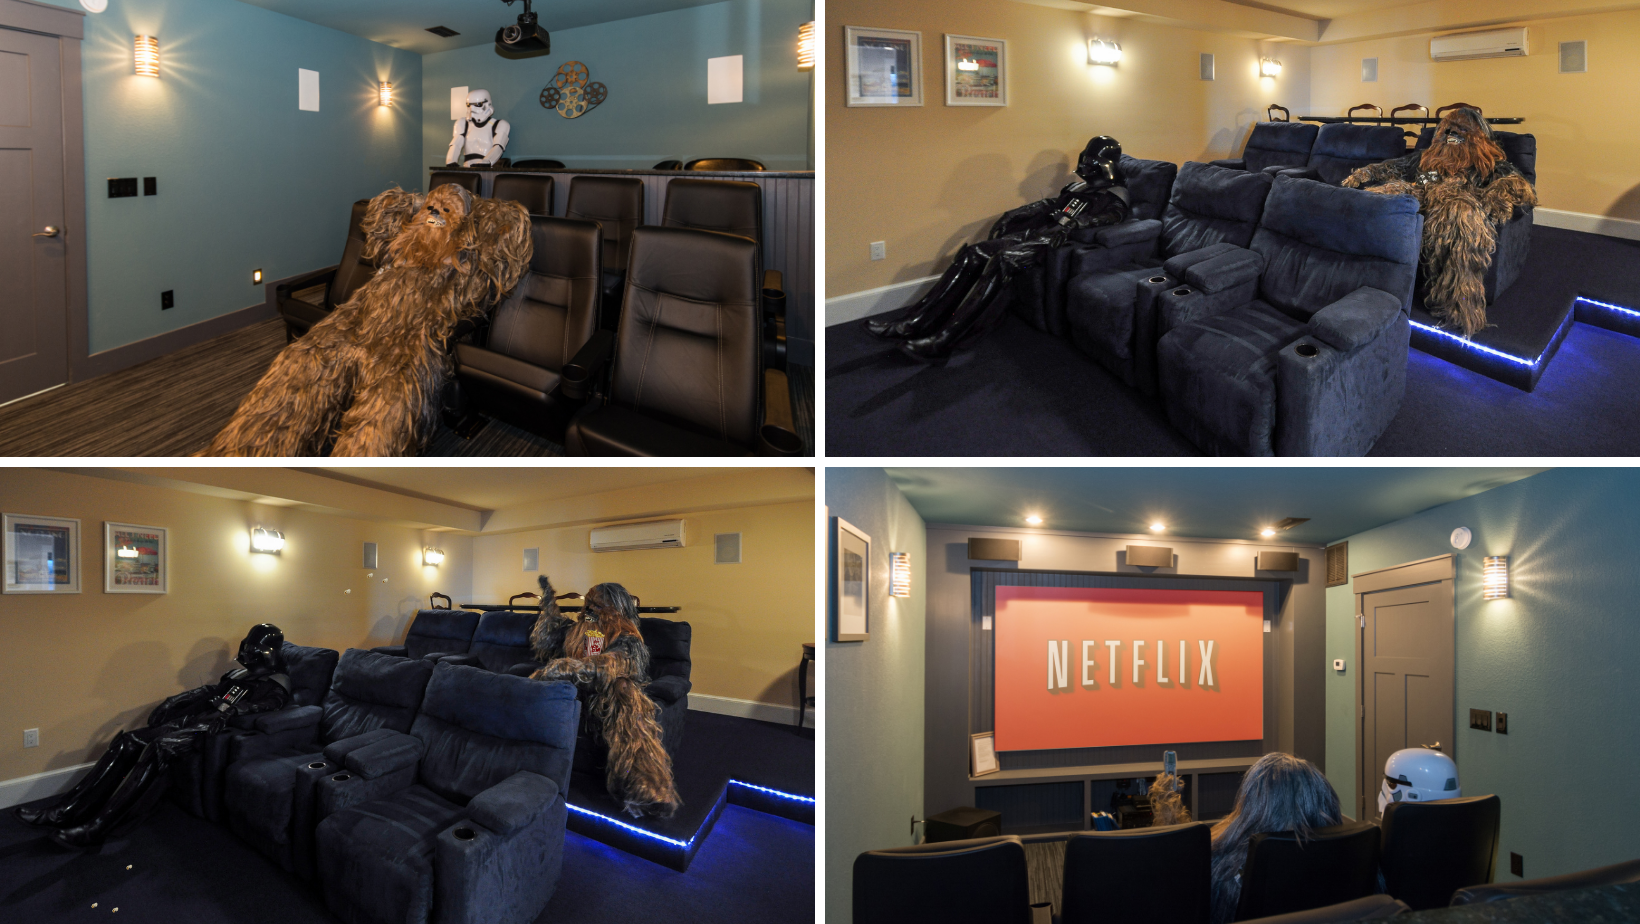 Star Wars - Top 6 Outer Banks Home Theater Rooms